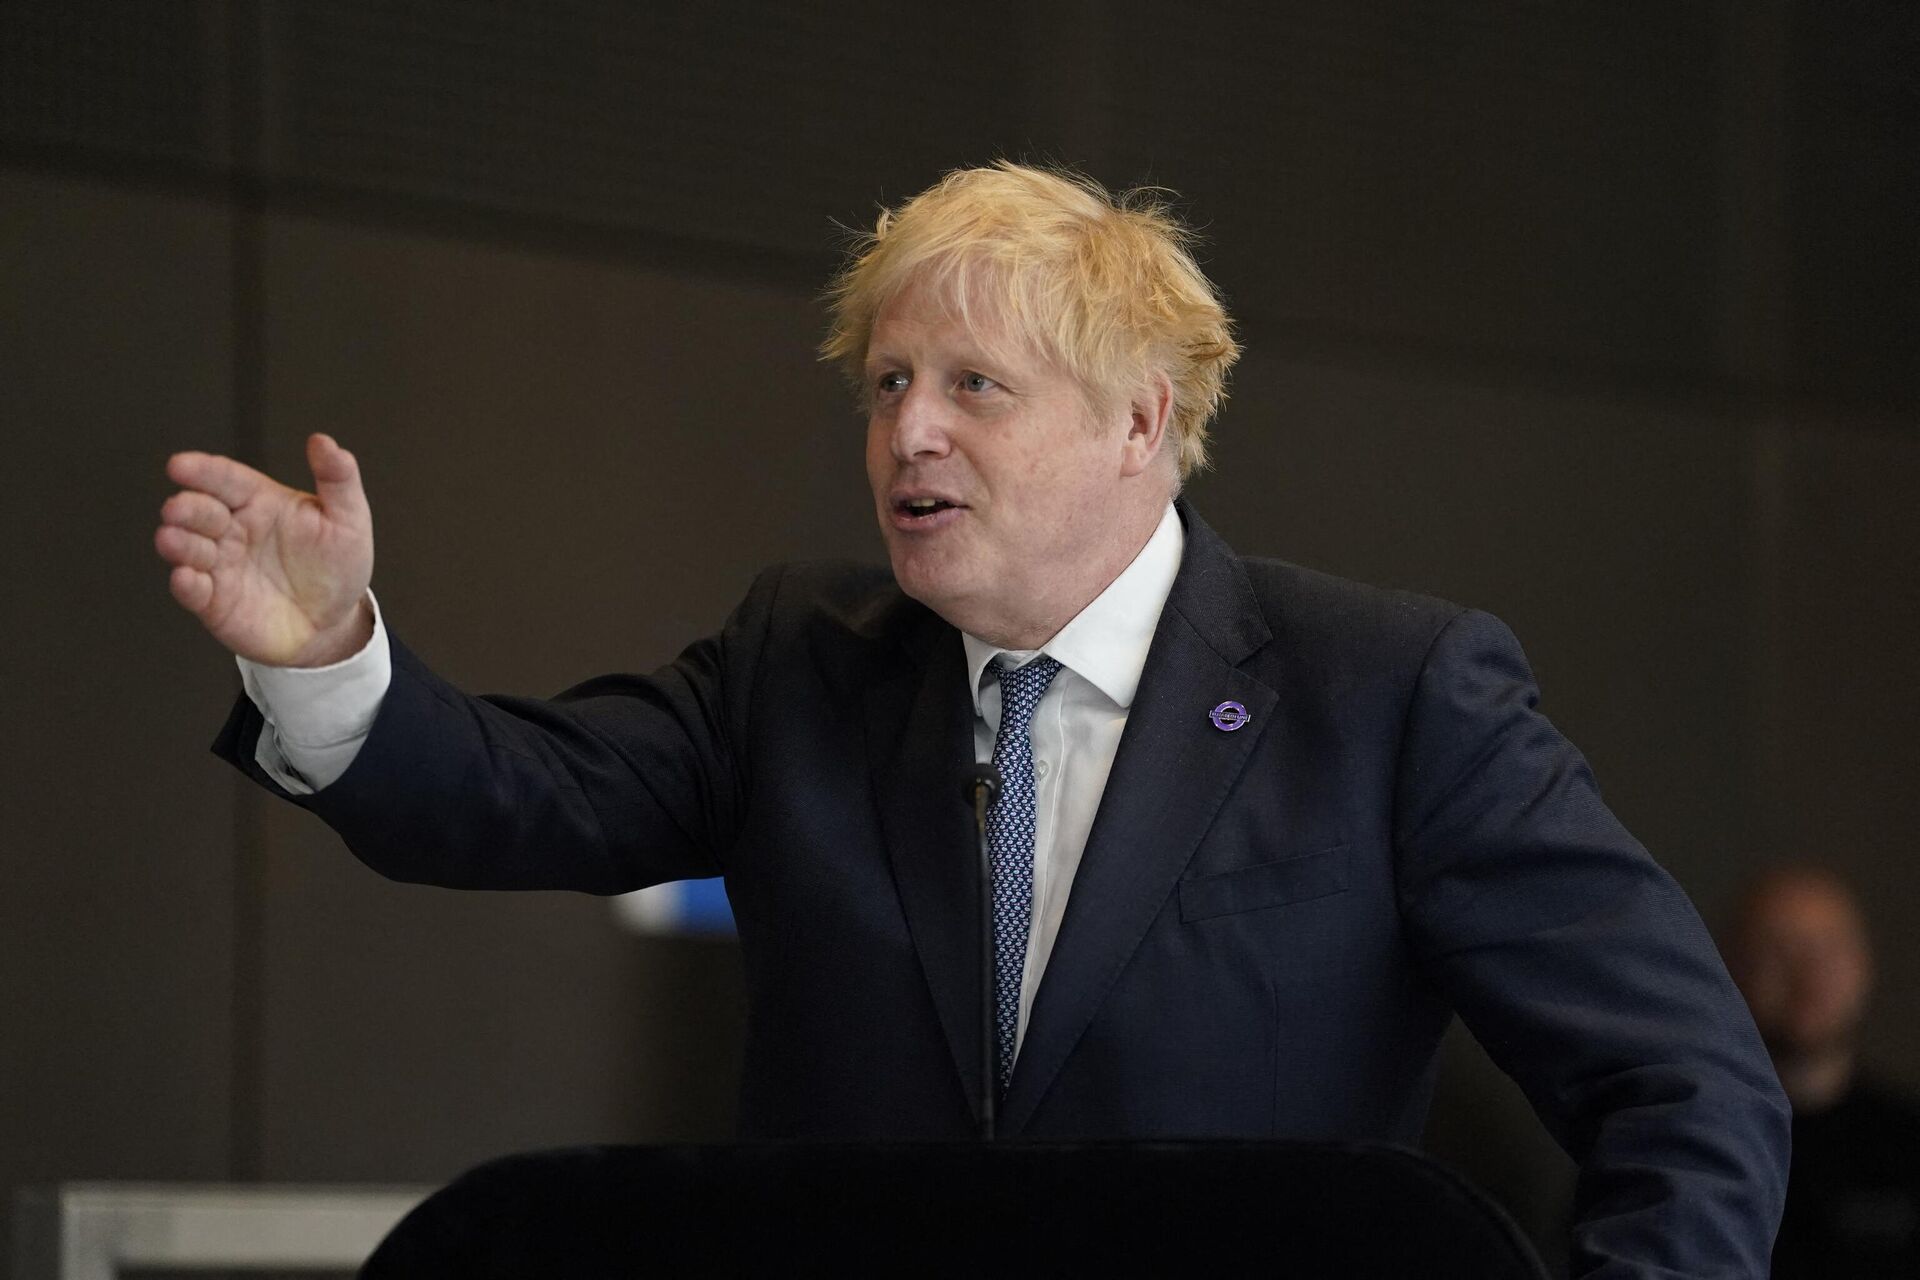 Britain's Prime Minister Boris Johnson speaks during his visit to Paddington Station in London on May 17, 2022, to mark the completion of London's Crossrail project, ahead of the opening of the new 'Elizabeth Line' next week - Sputnik International, 1920, 19.06.2022